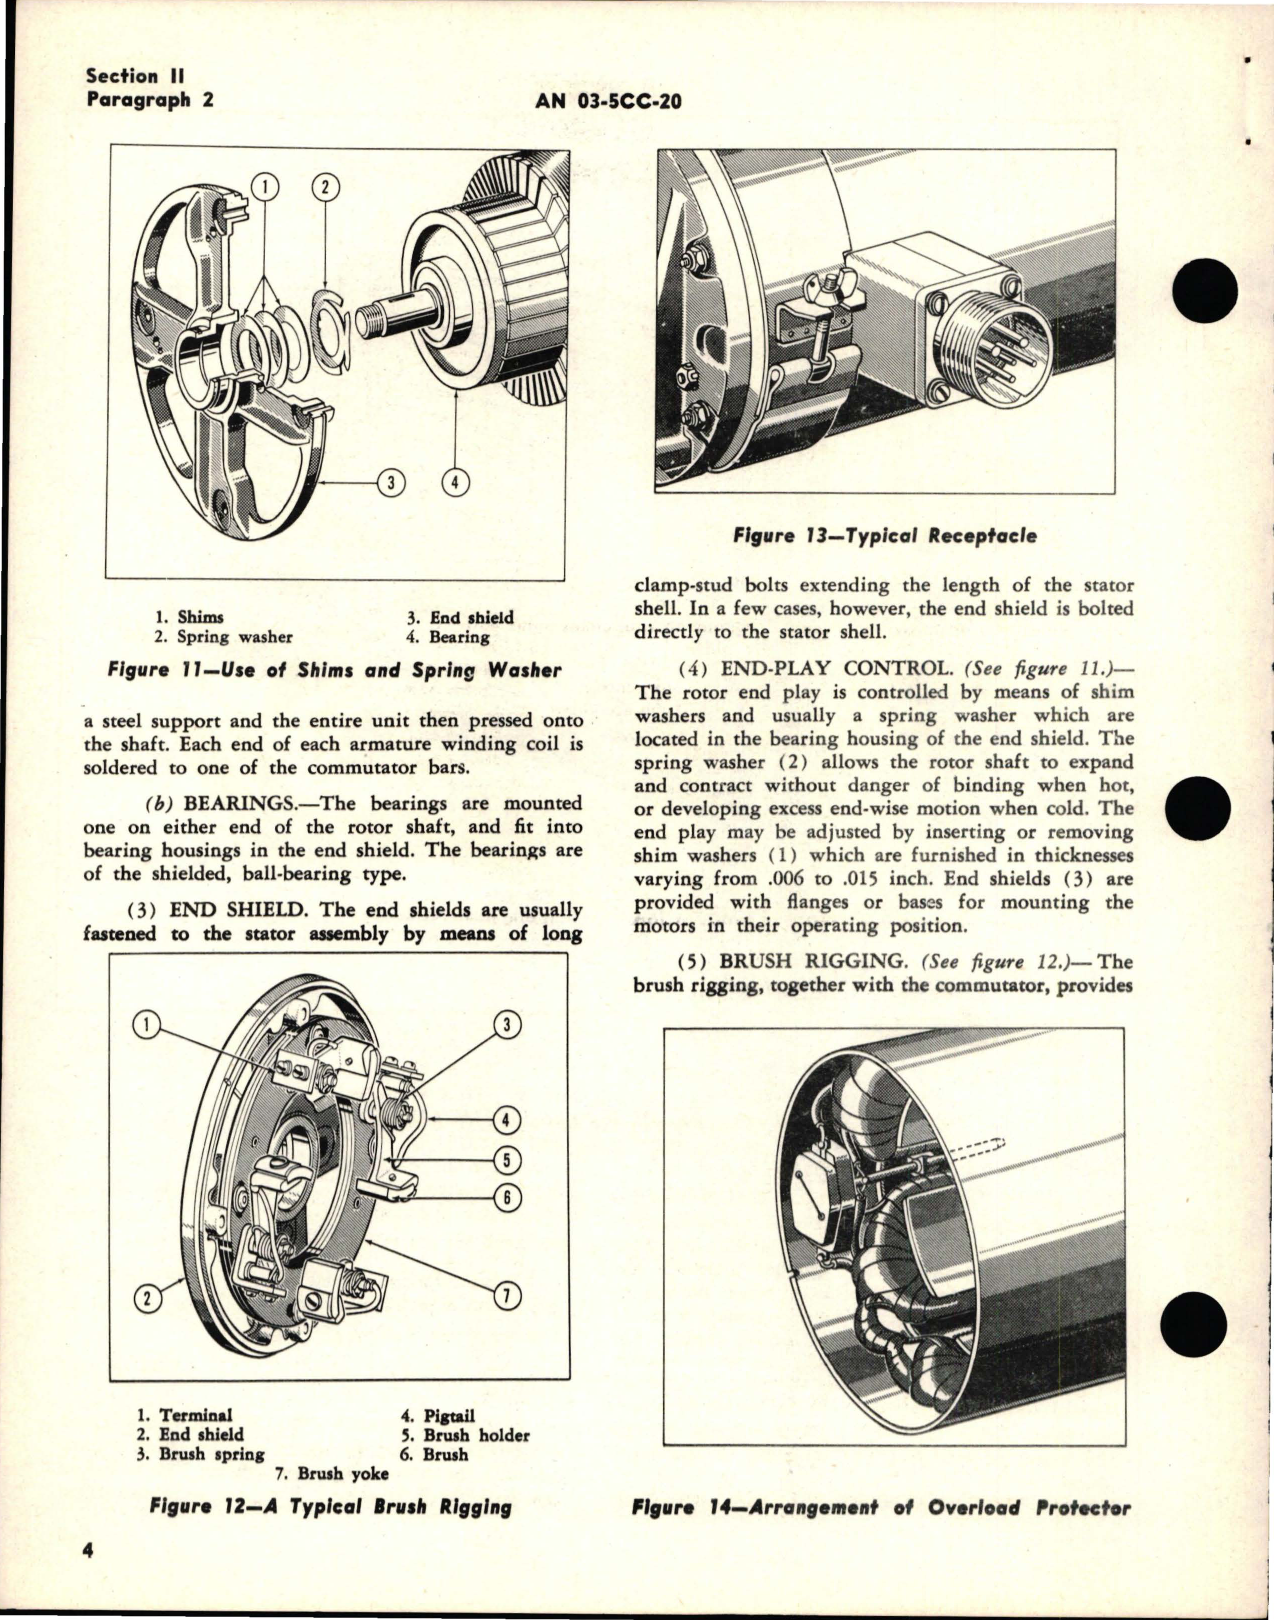 Sample page 8 from AirCorps Library document: Instructions with Parts Catalog for Aircraft Motors - Models 5BC21 and 5BC31 Series 